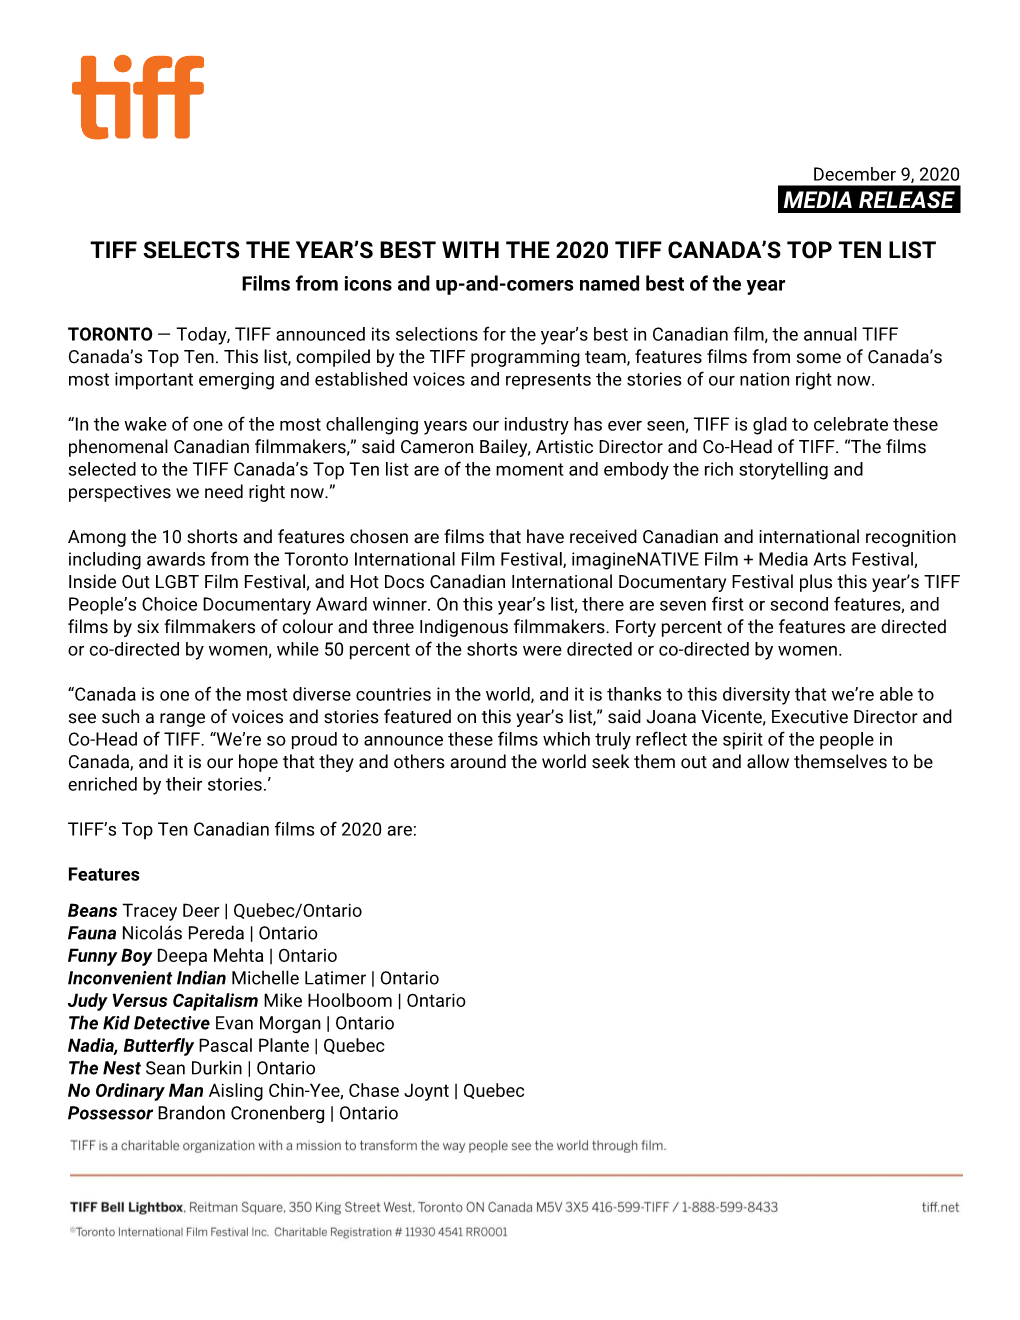 Media Release​. Tiff Selects the Year's Best with the 2020